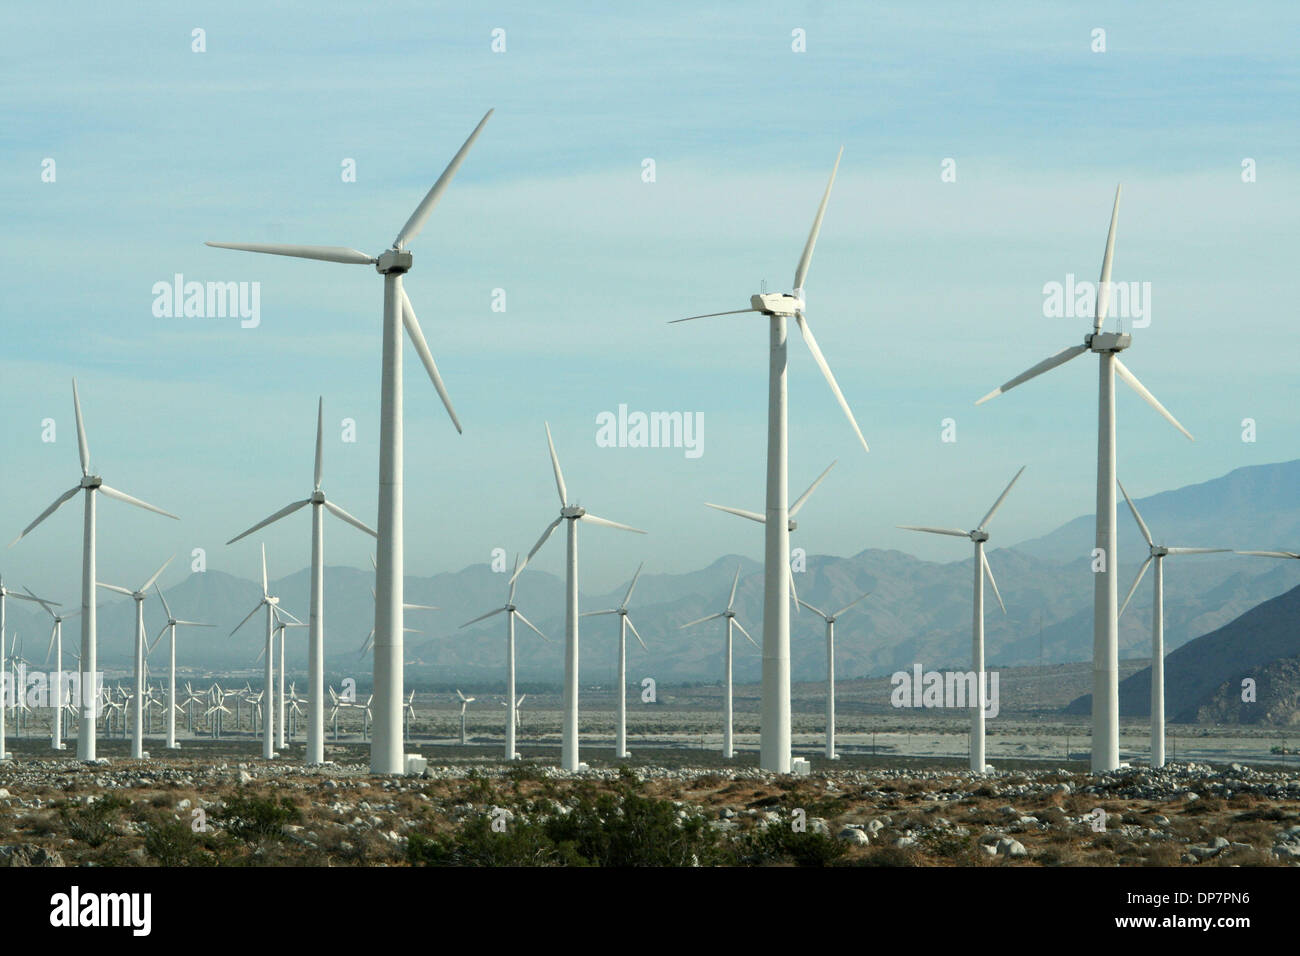 Nov 26, 2006; Cabazon, CA, USA; Turbines generate power in San Gorgonio near Palm Spring California. Wind power is the kinetic energy of wind, or the extraction of this energy by wind turbines. In 2004, wind power became the least expensive form of new power generation, dipping below the cost per kilowatt-hour of coal-fired plants. Wind power is growing faster than any other form o Stock Photo